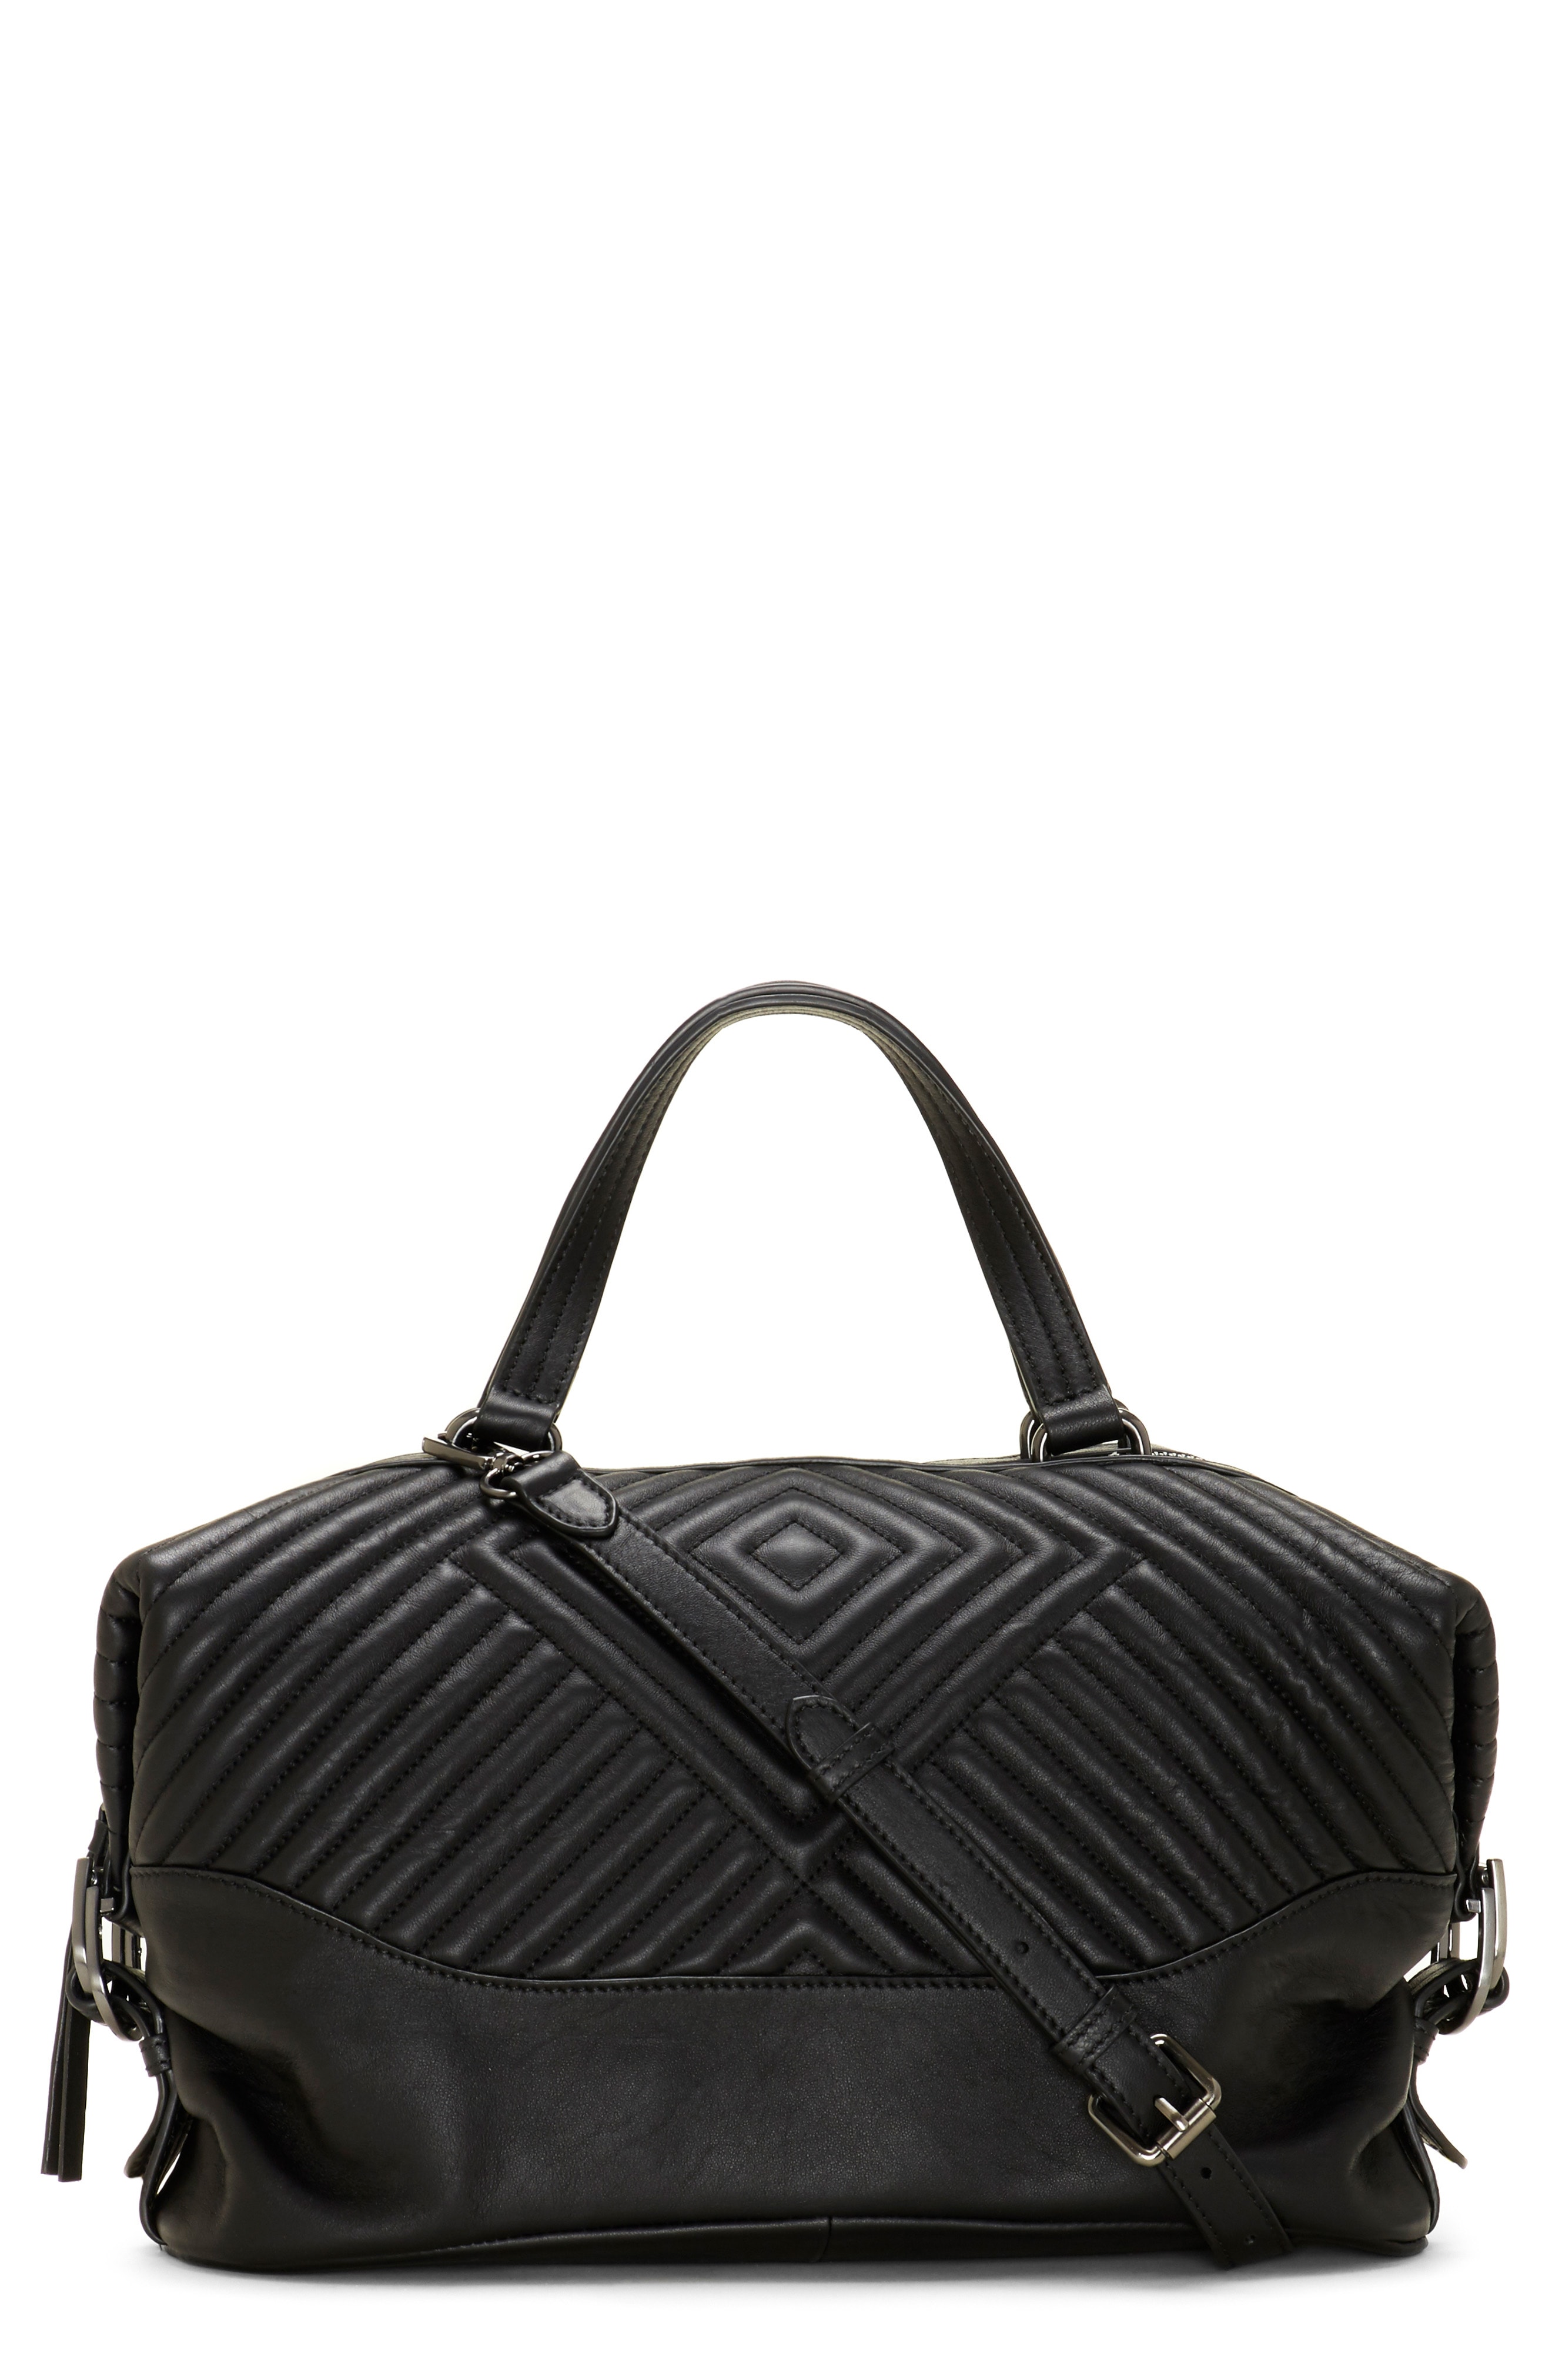 Vince Camuto Tave Quilted Leather Satchel